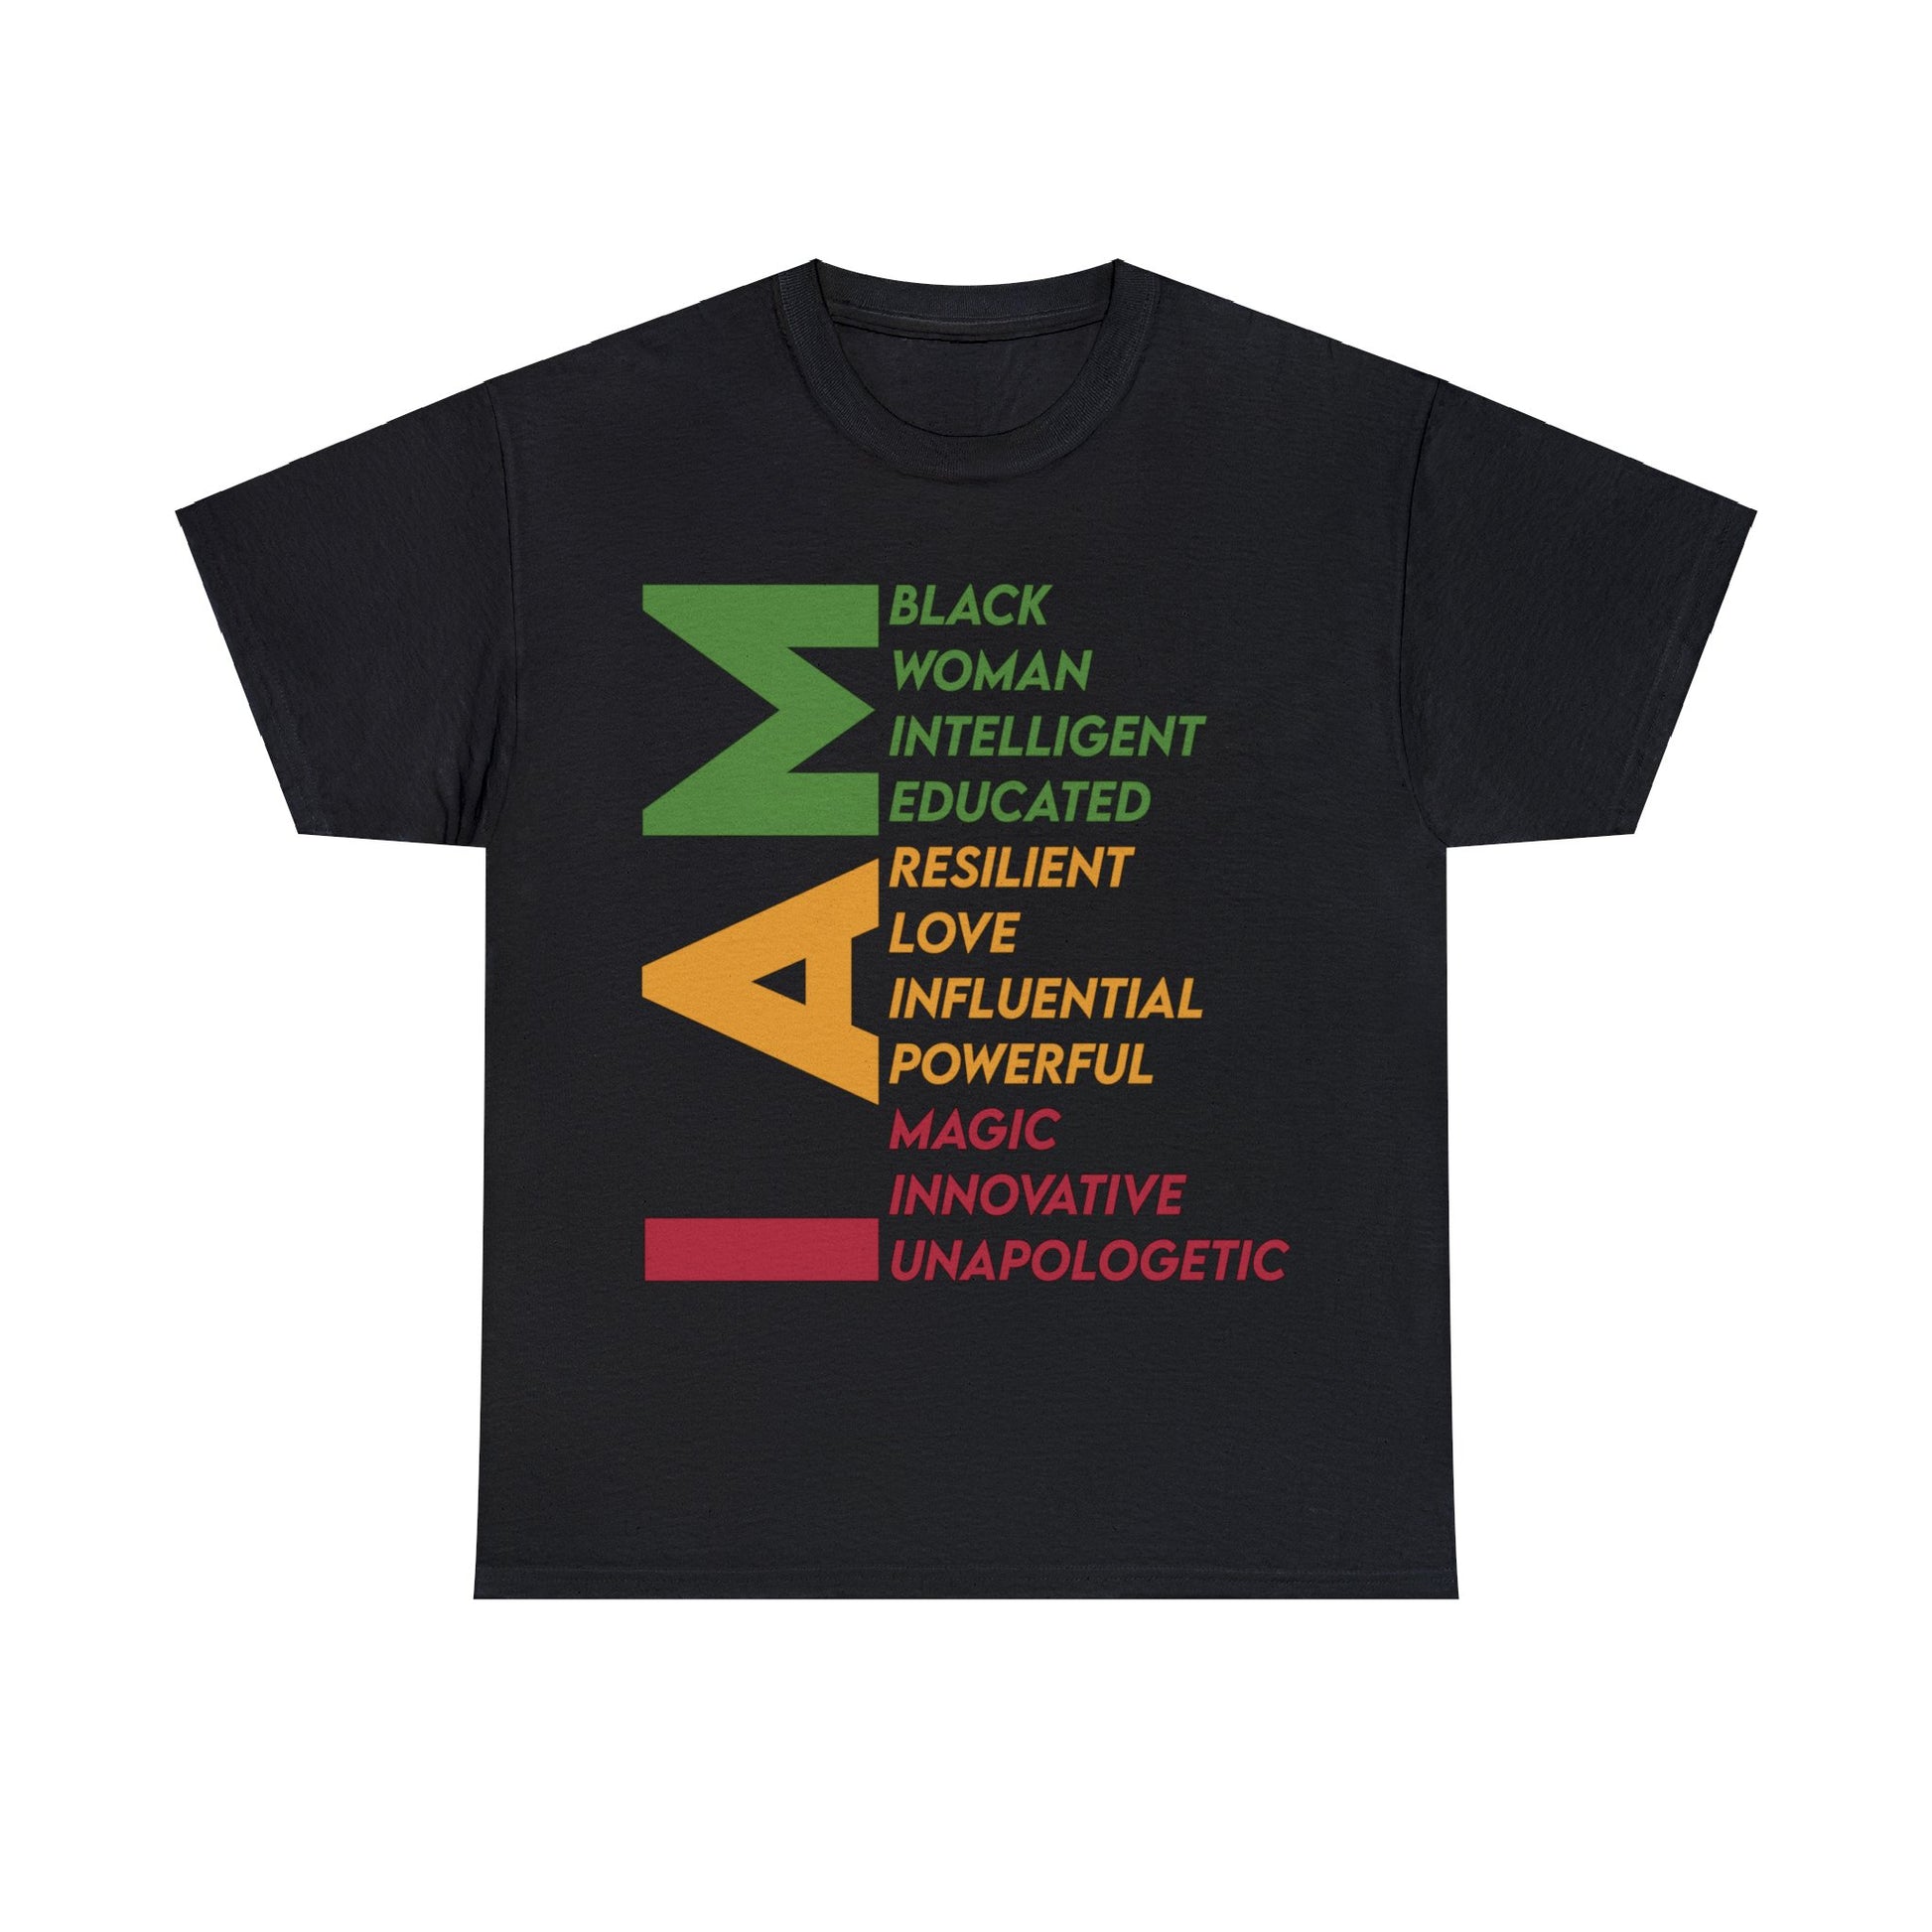 Black Unisex Heavy Cotton Tee saying " I AM: Black Woman, Intelligent, Educated, Resilient, Love, Influential, Powerful, Magic, Innovative, and Unapologetic"